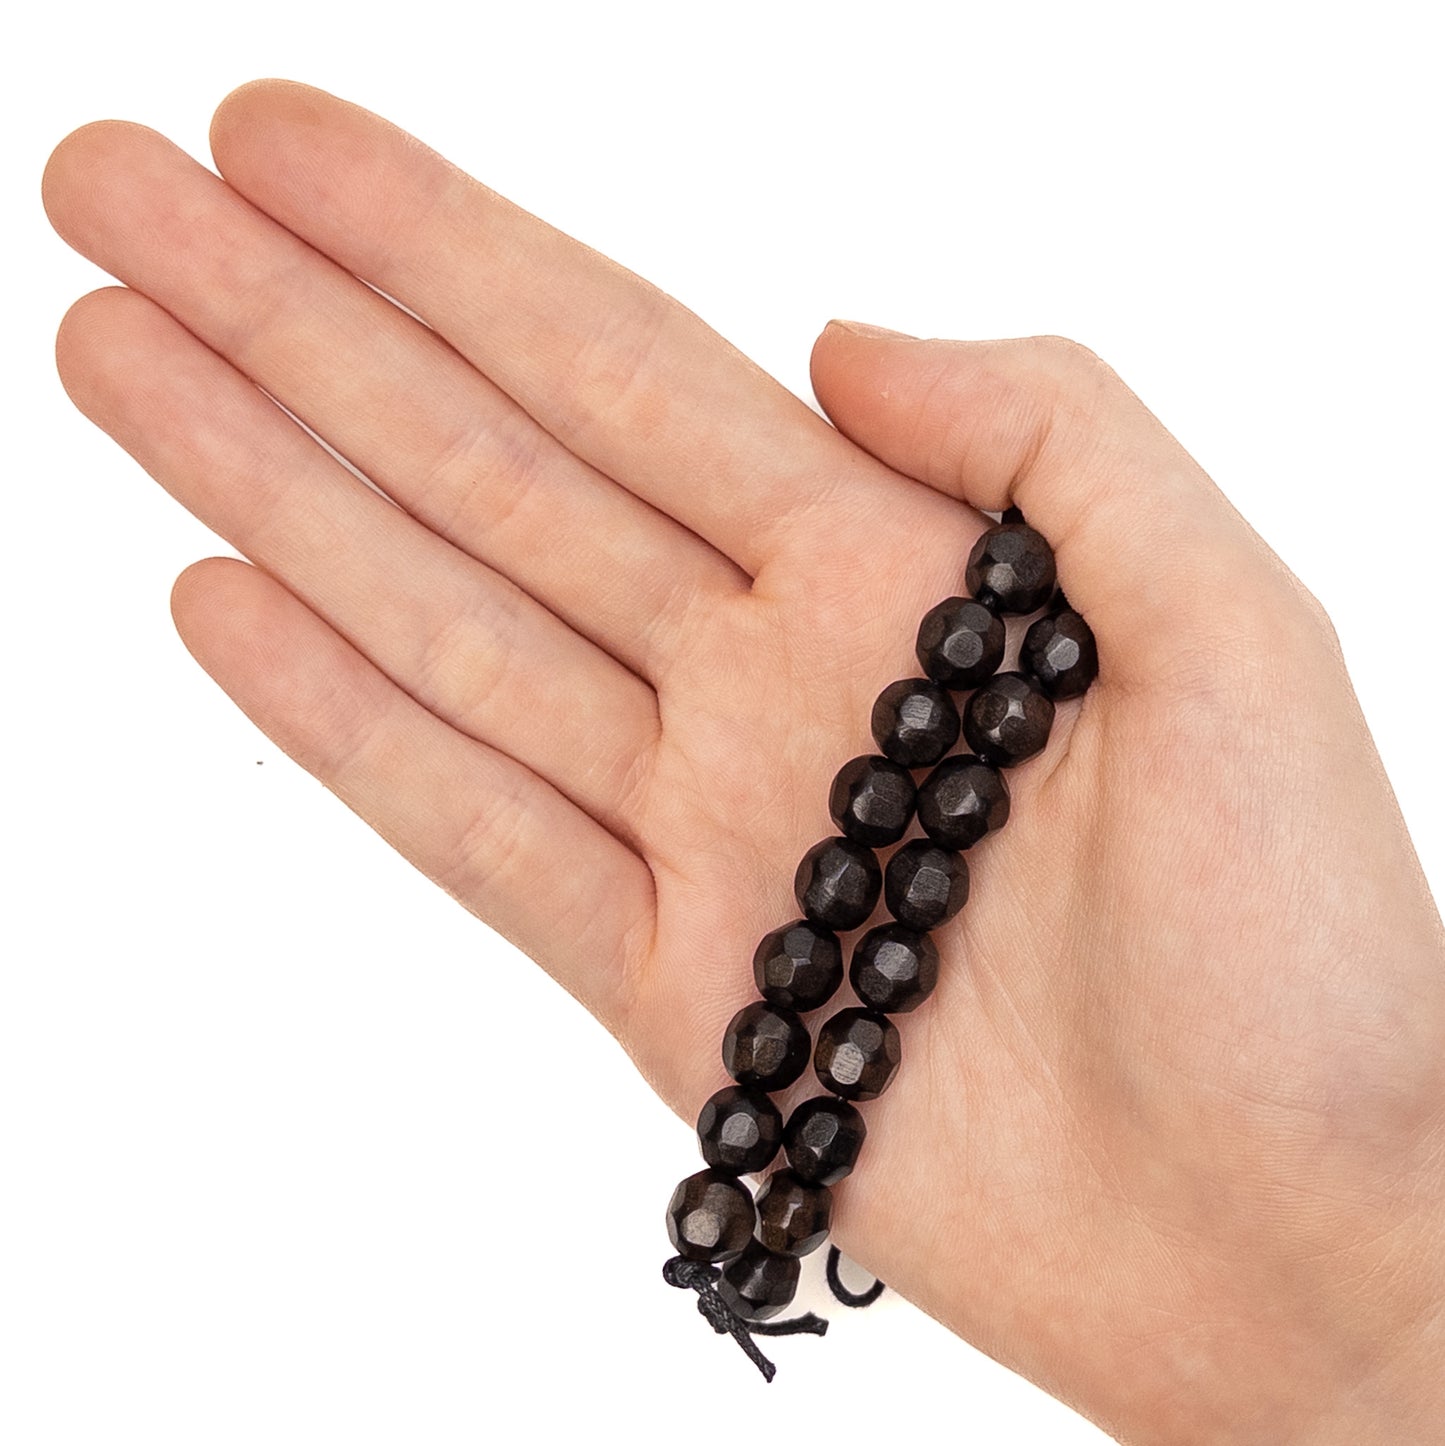 Faceted Ebony Wood 8mm Round Bead - 4.5" Strand-The Bead Gallery Honolulu